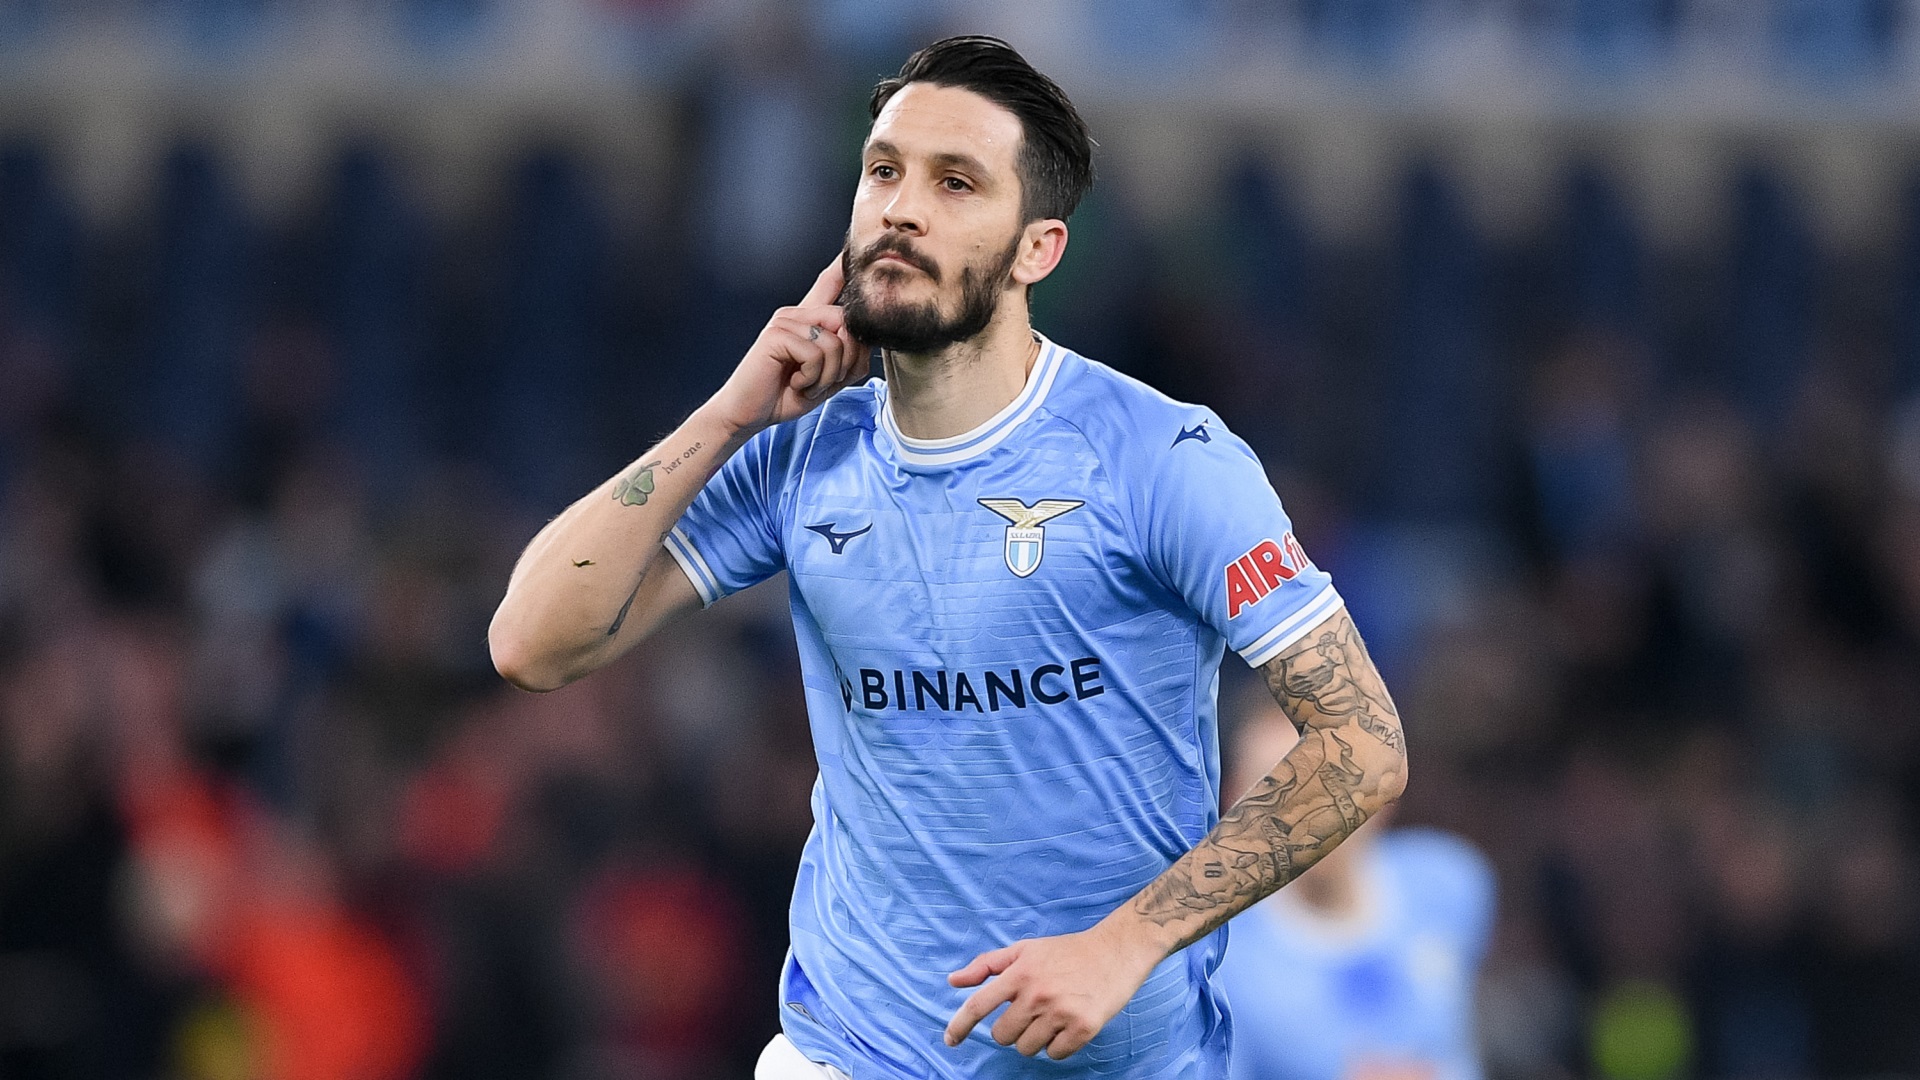 Luis Alberto has been playing well since he announced he would leave Lazio at the end of the season, looking reinvigorated and committed to the cause